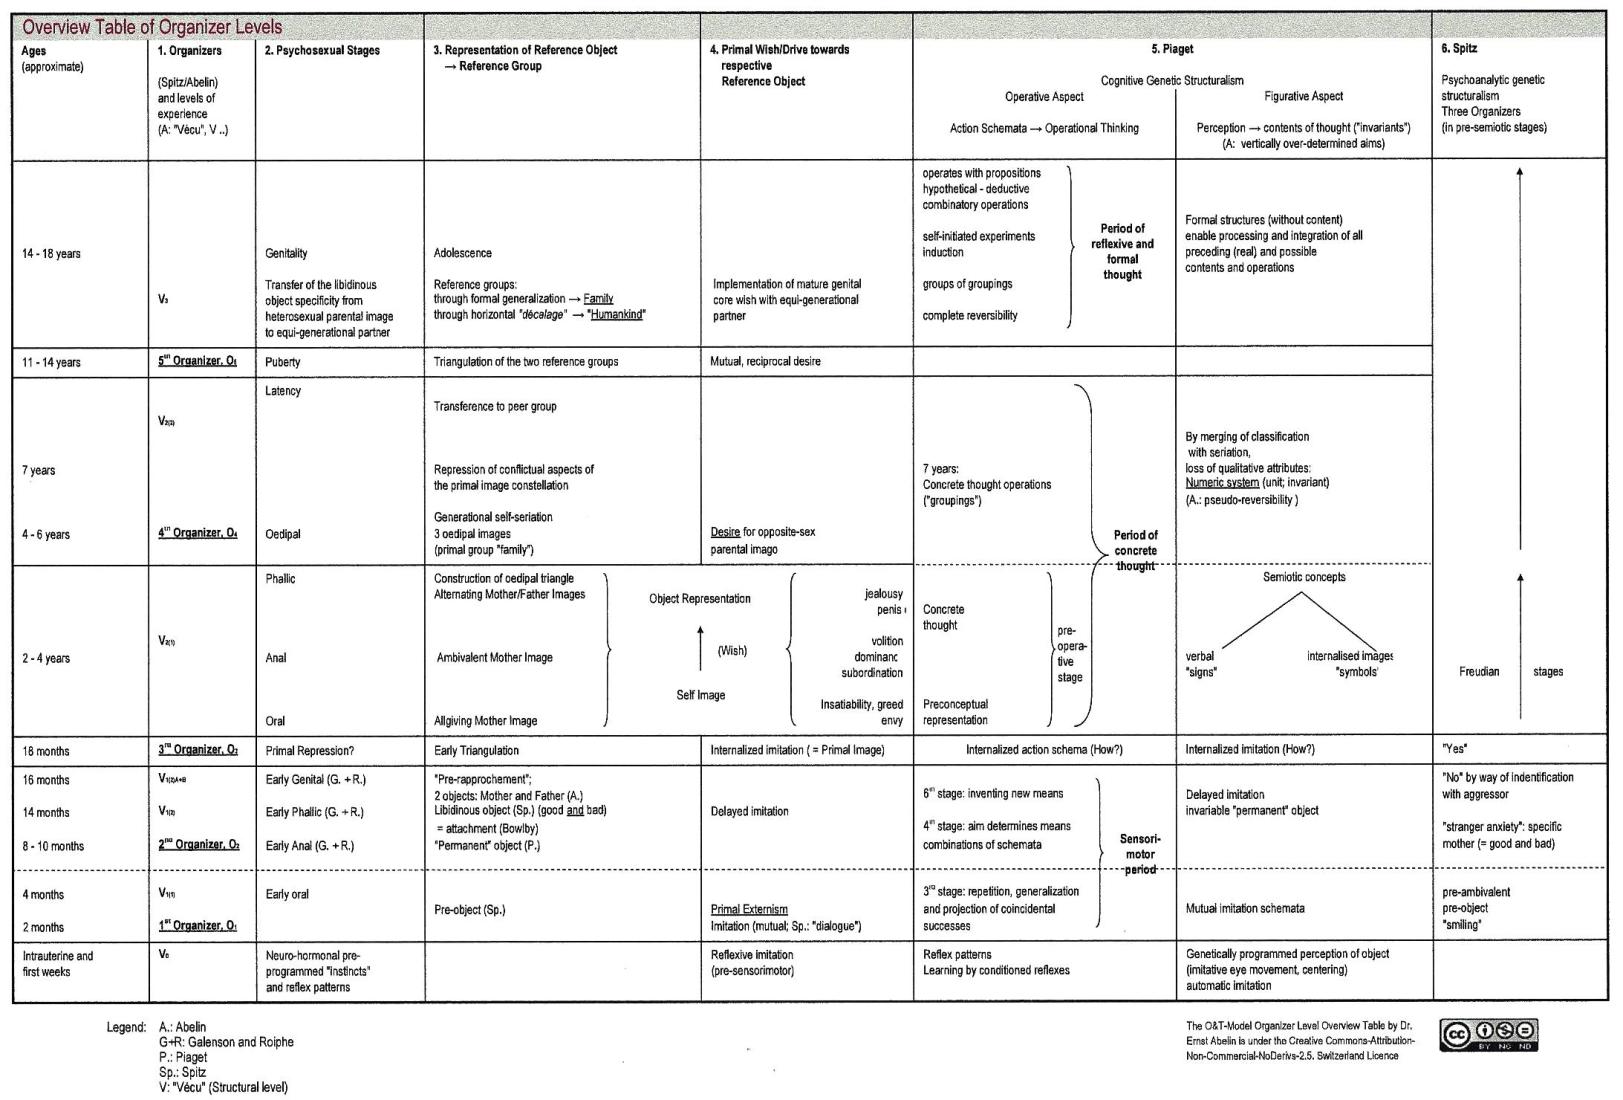 Overview Table of Organizer Levels 2012 in English